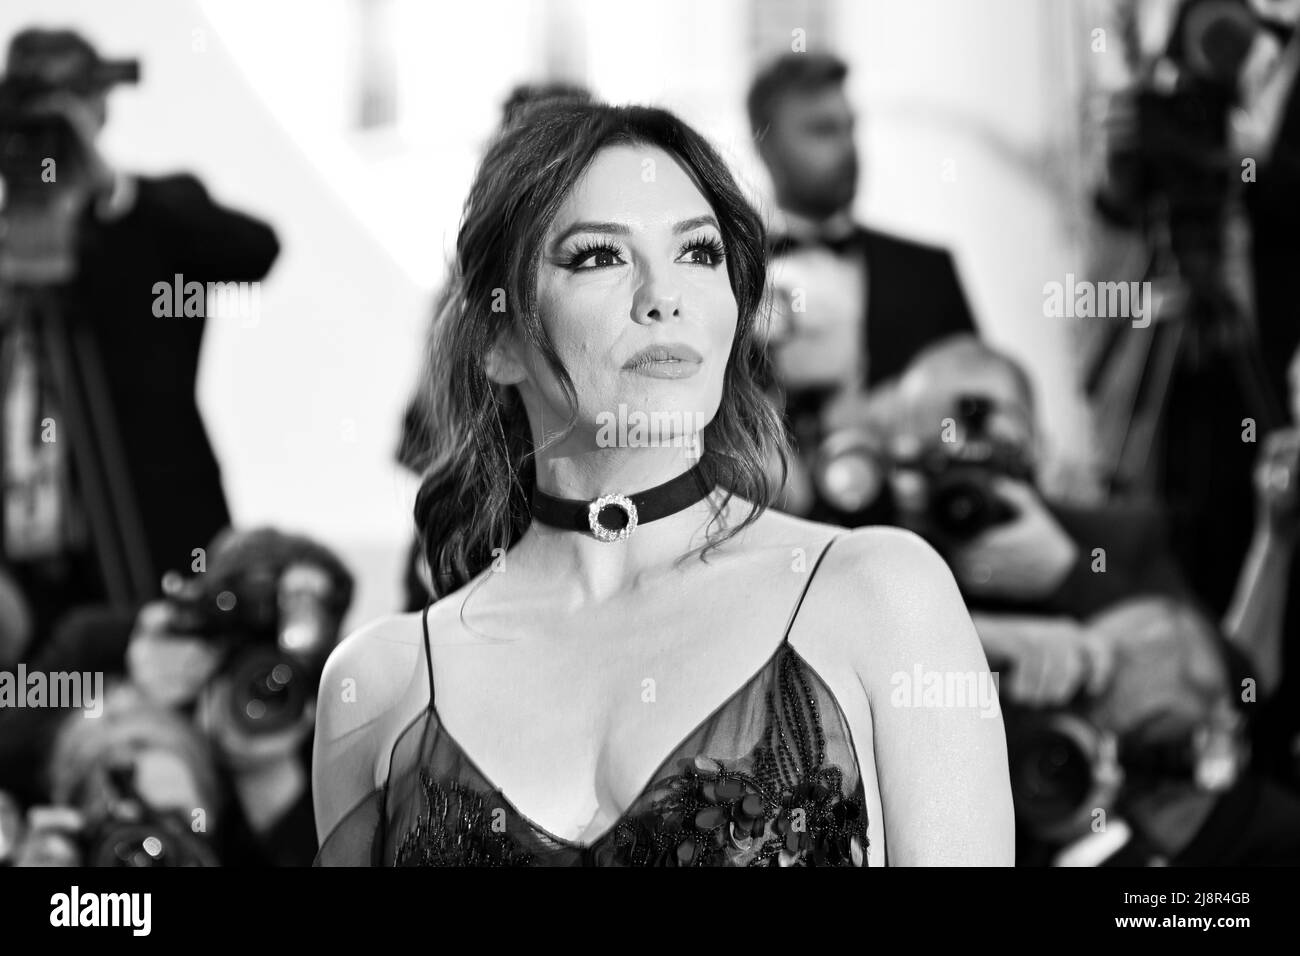 cannes-france-17th-may-2022-eva-longoria-attends-for-the-screening-of-the-film-final-cut-coupez-and-the-opening-ceremony-of-the-75th-cannes-film-festival-on-may-17-2022-in-cannes-france-credit-image-lurmaneyepix-via-zuma-press-wire-2J8R4GB.jpg